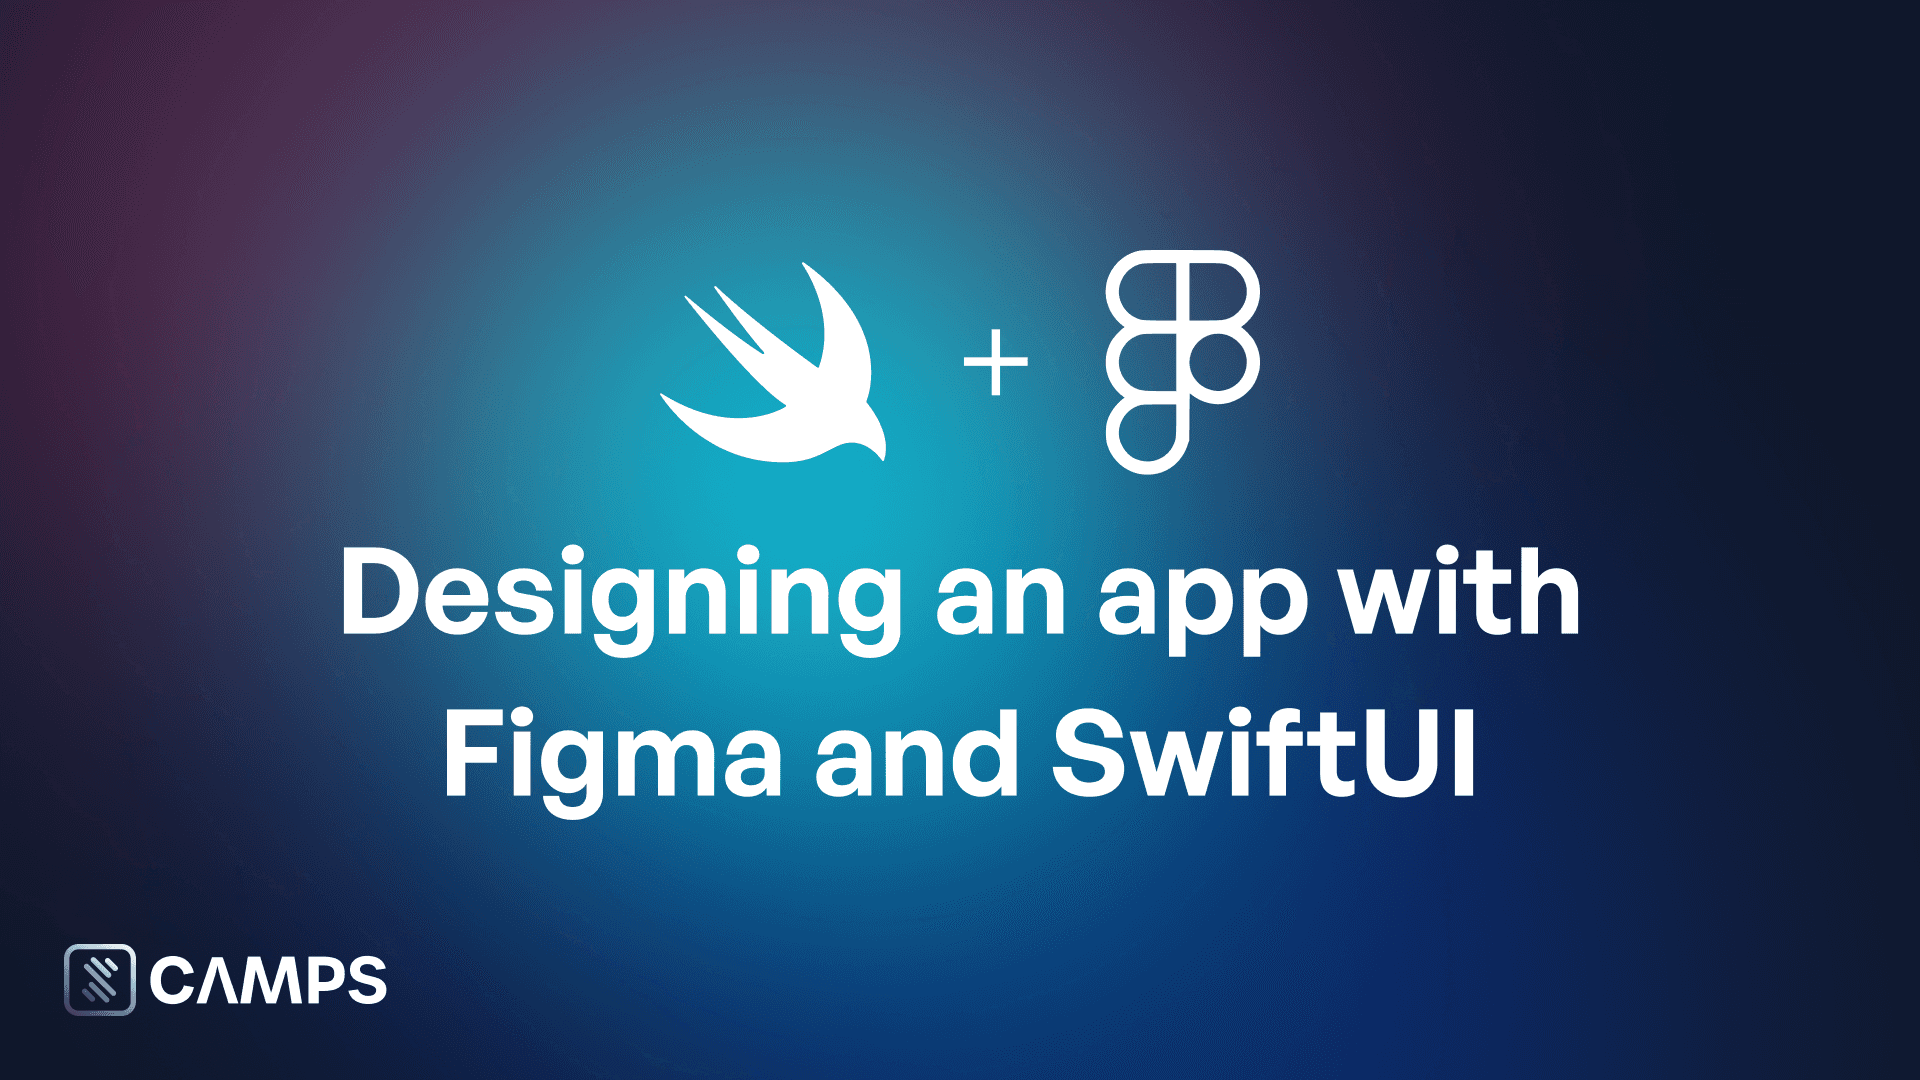 Designing an app with Figma and SwiftUI